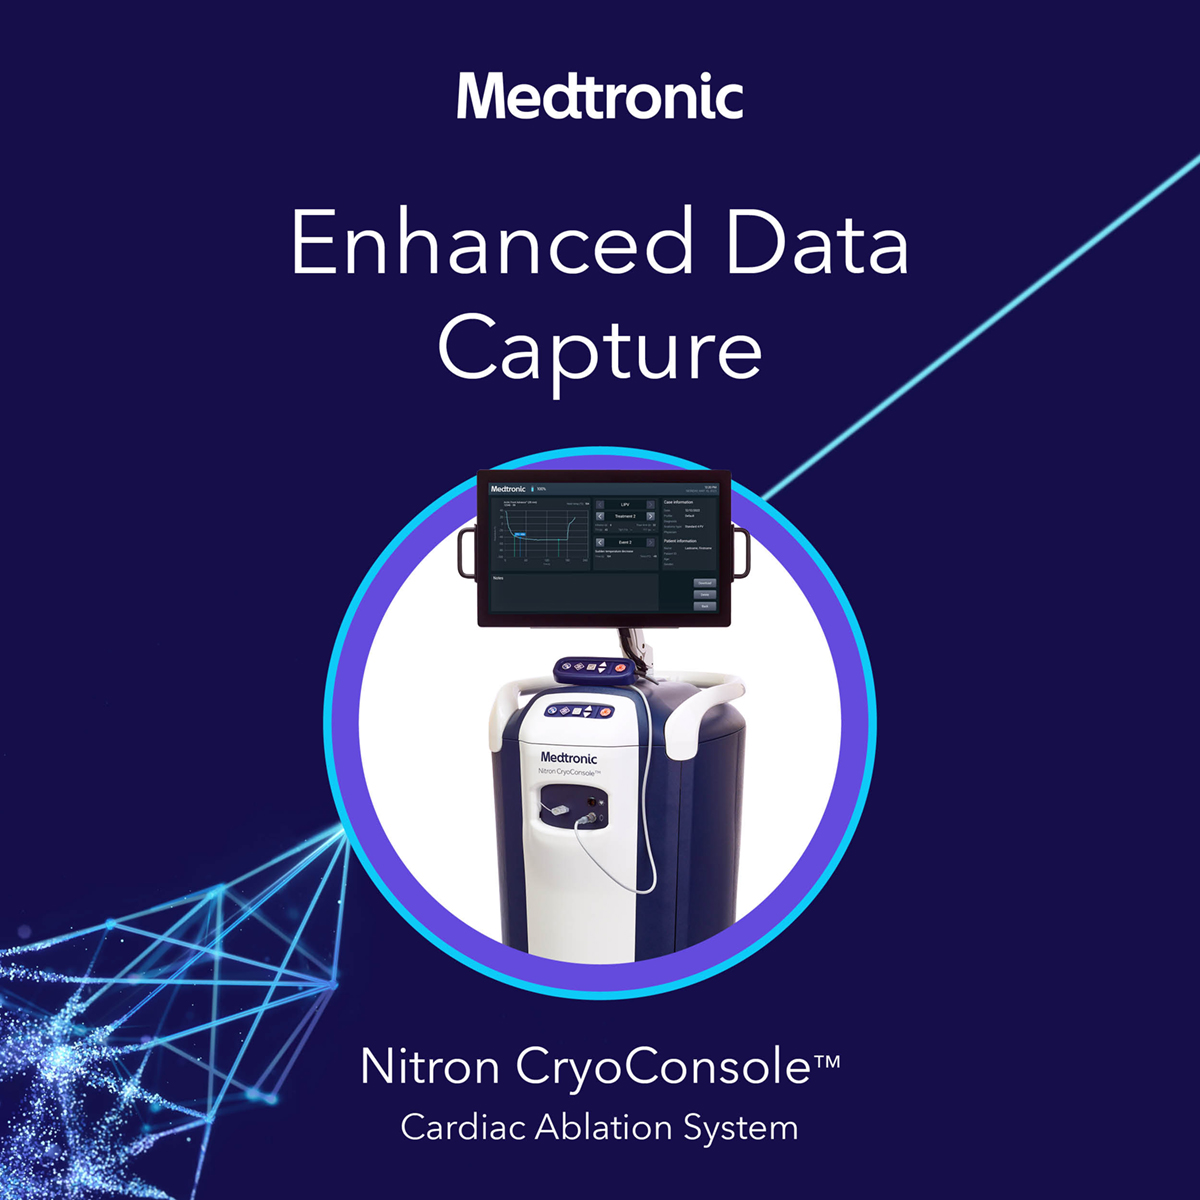 The new Nitron CryoConsole™ system offers enhanced data capture: Automated & customizable key procedural data captures real-time and post-procedure in exportable case summary reports. Learn more: bit.ly/3Uf8rtE See risk/benefit info: bit.ly/3Ug8PZ5